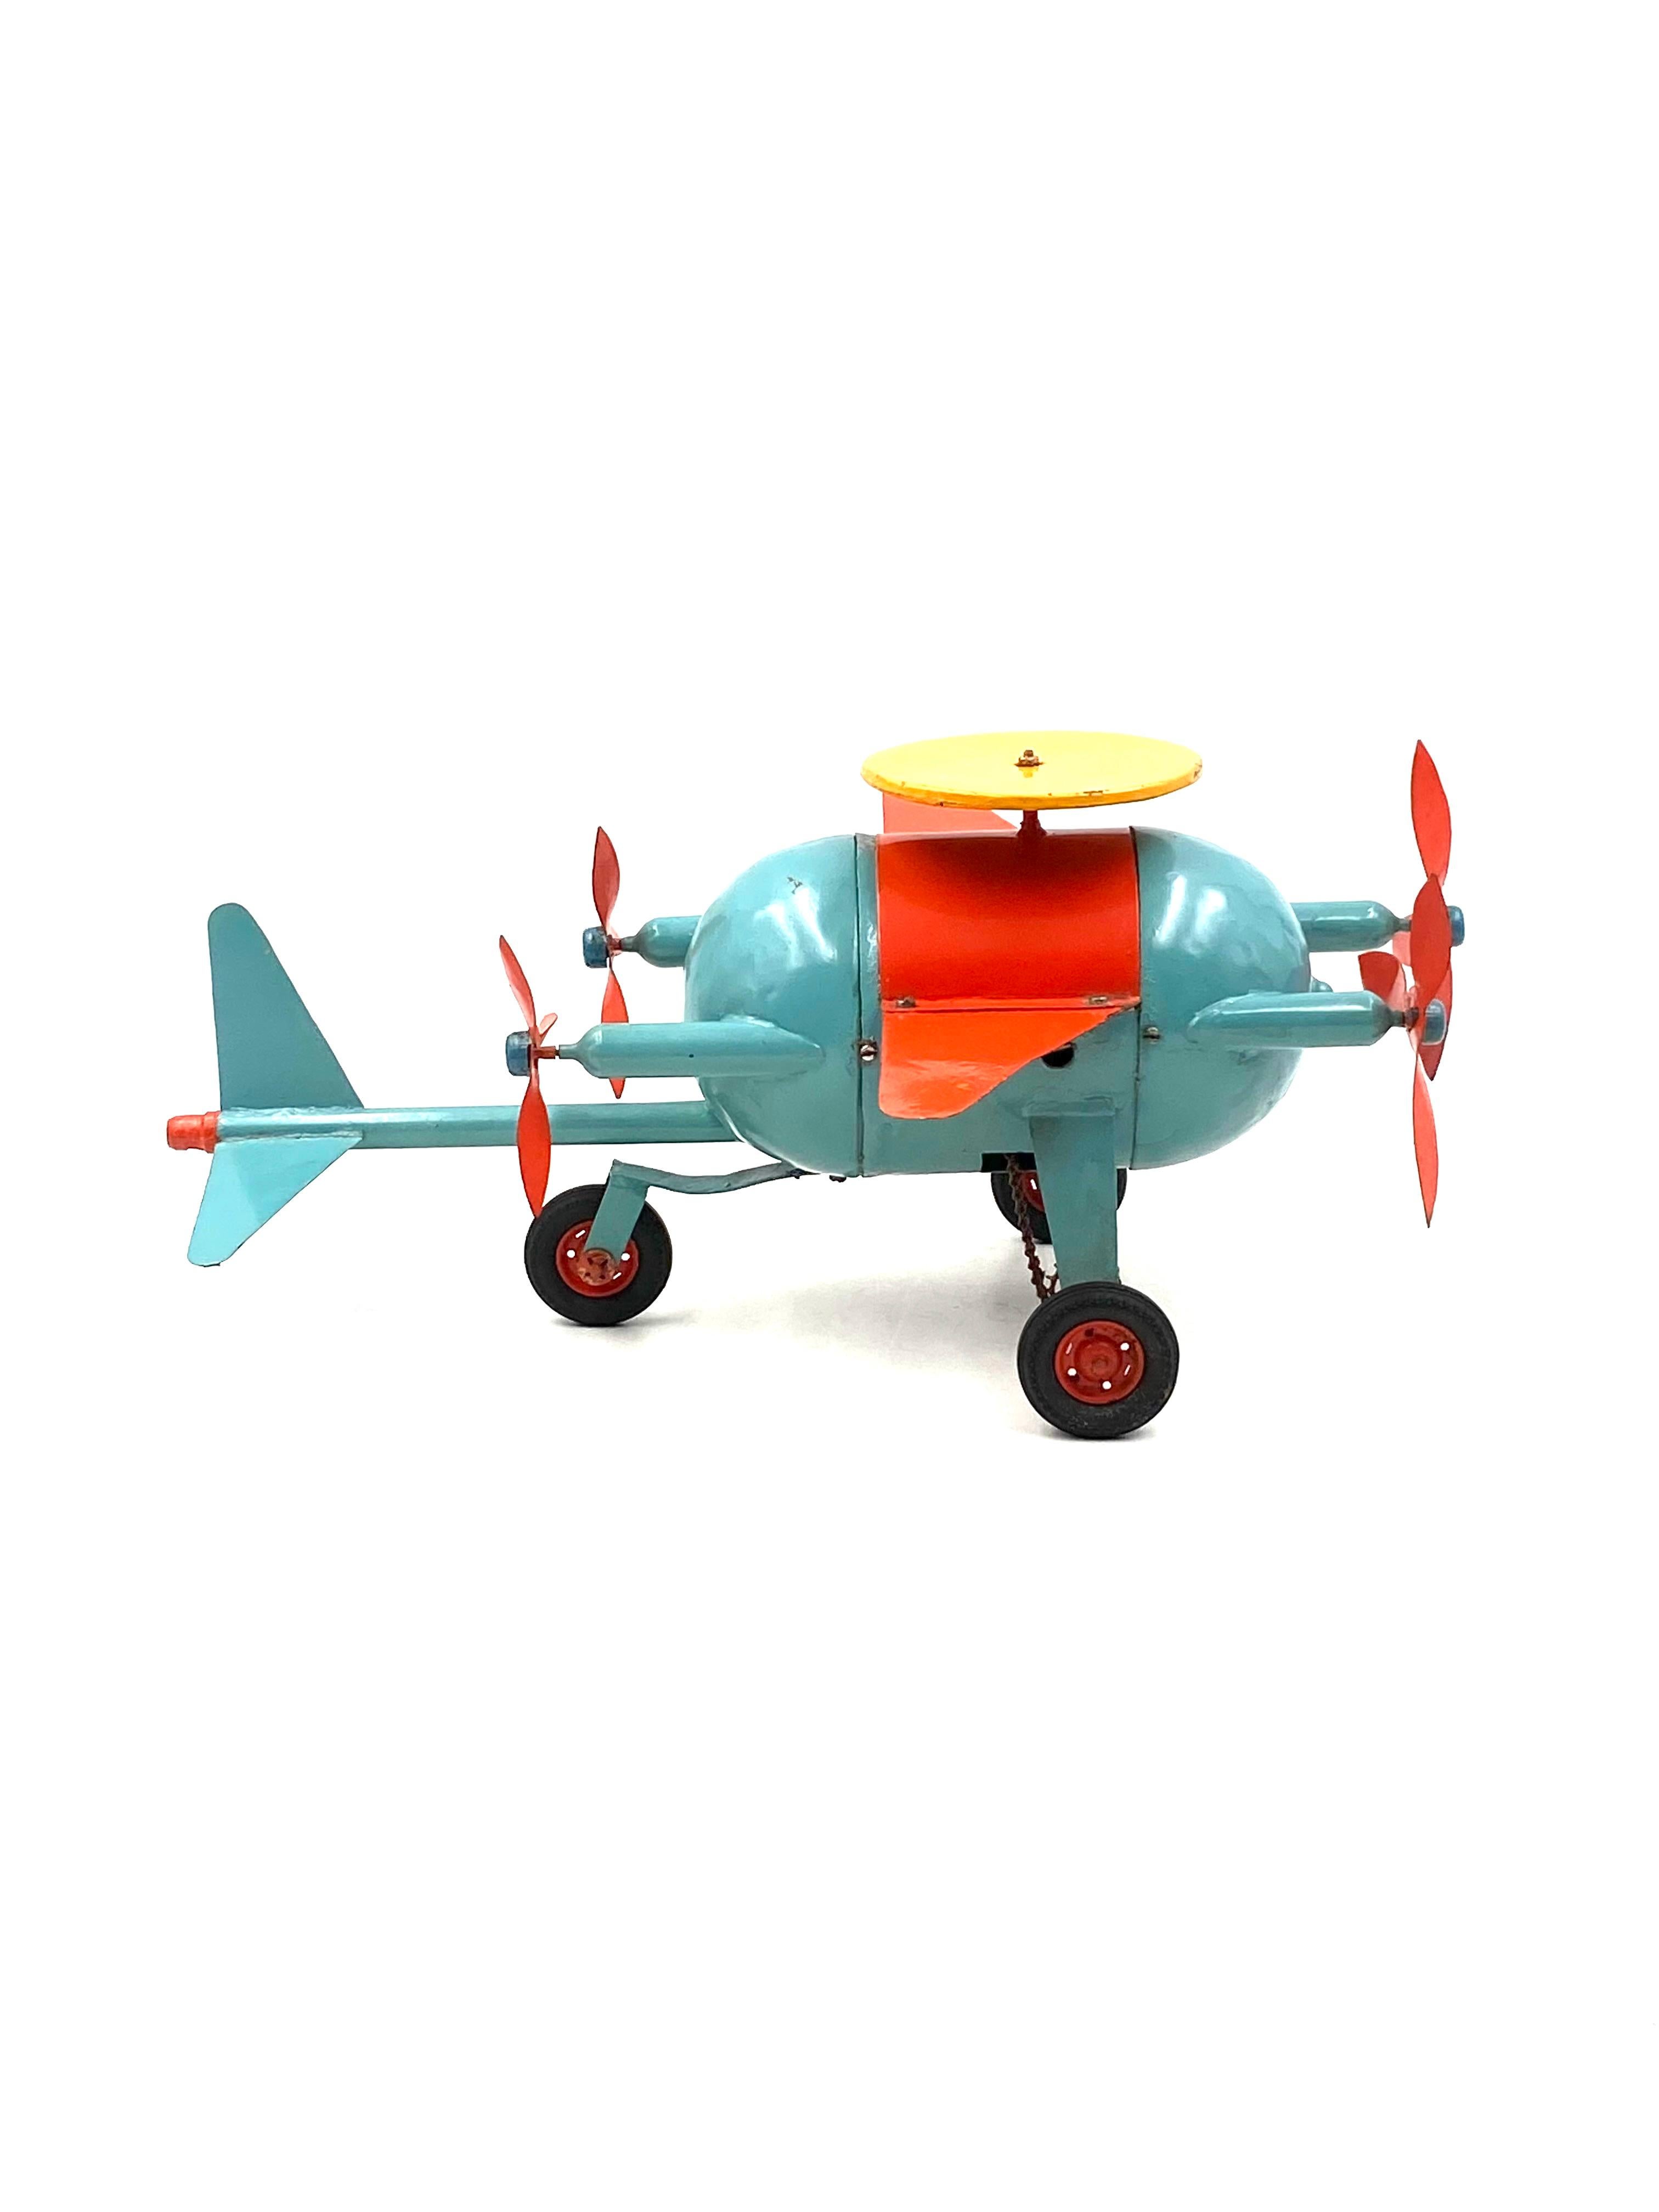 Red and blue airplane toy, France early 20th century For Sale 6